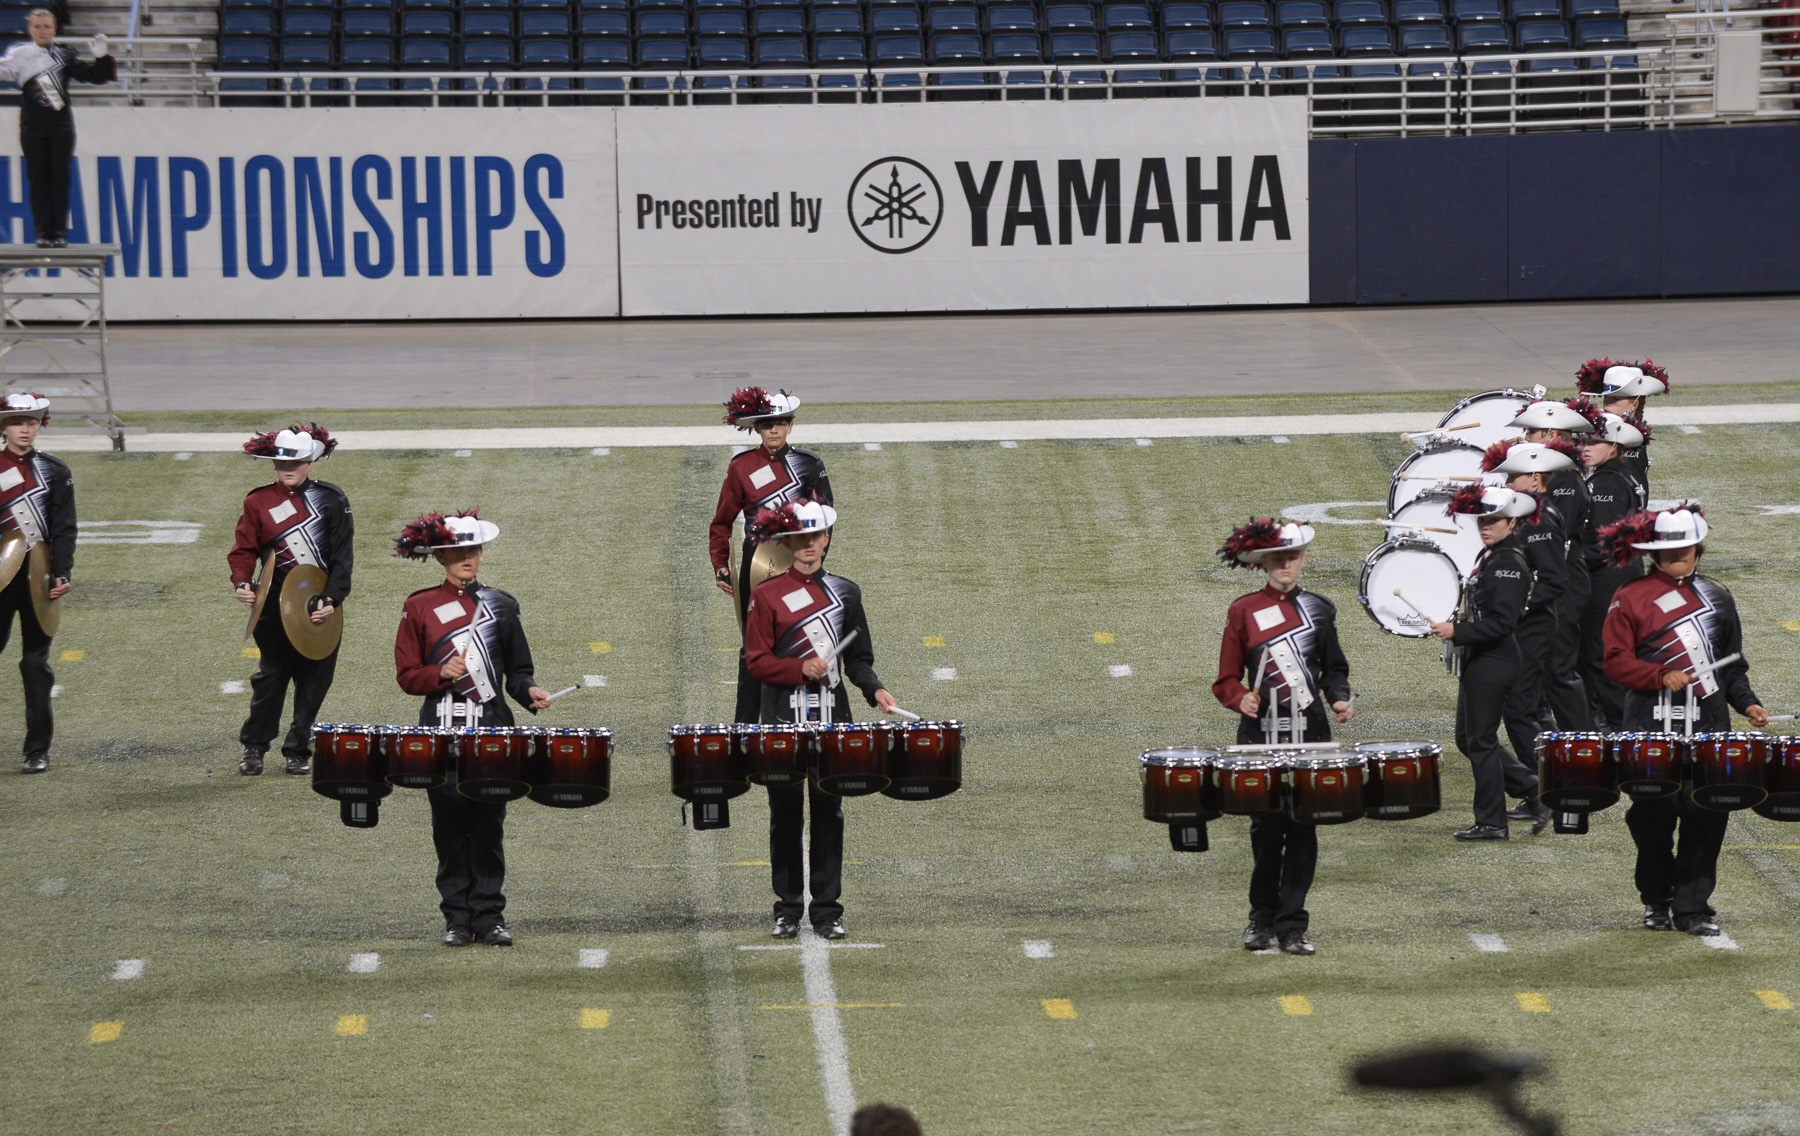 Band%3A+St.+Louis+BOA+Competition+Photo+Gallery